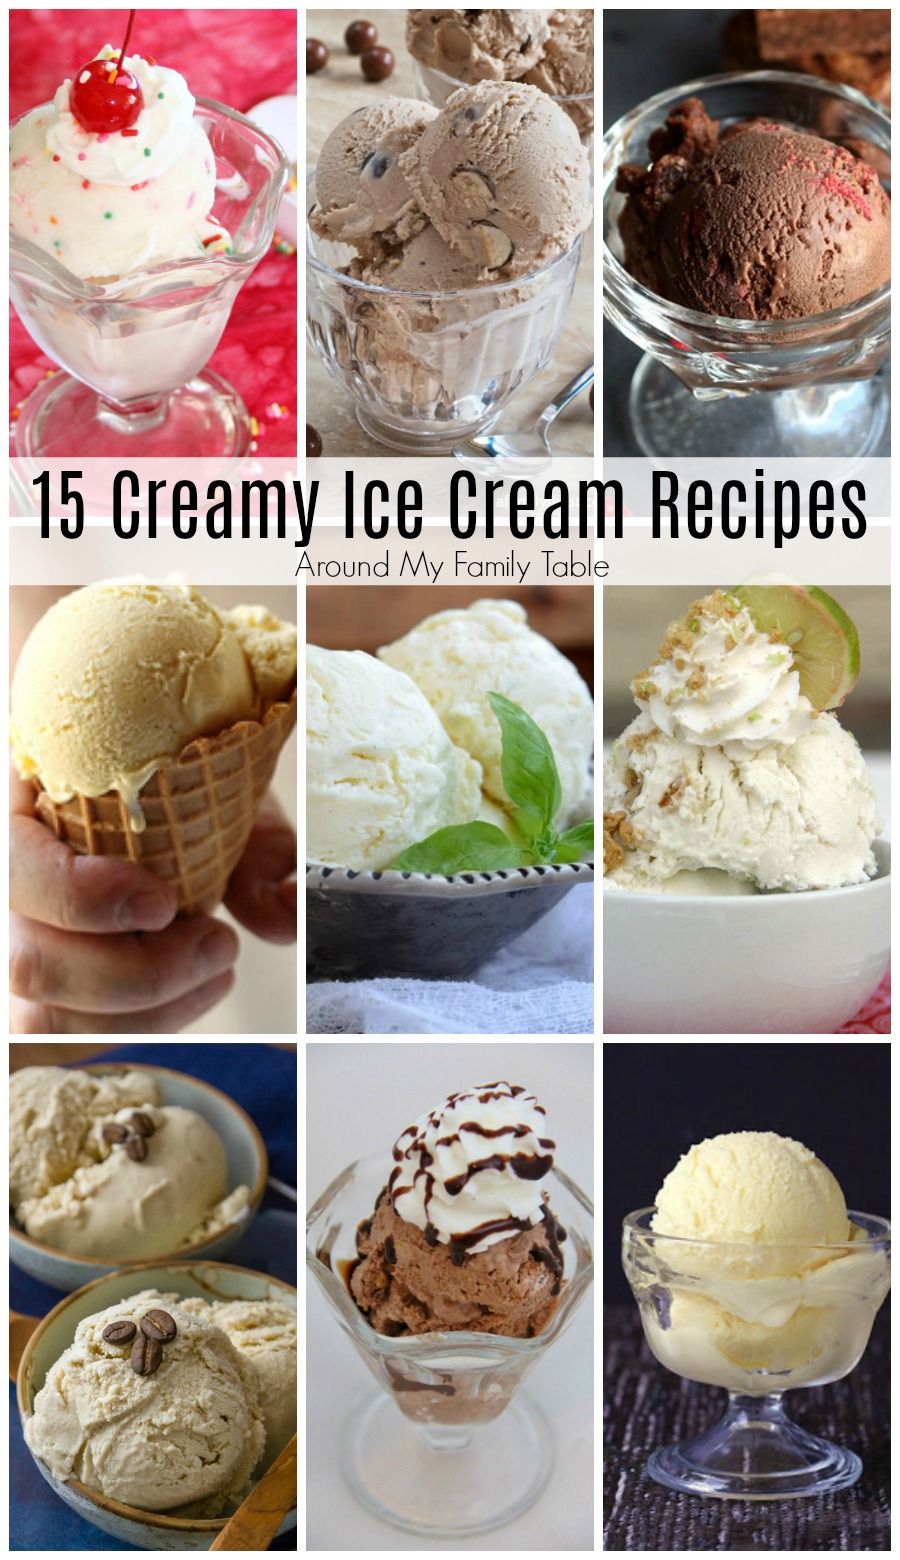 Summer means my ice cream maker is working overtime!  And these Creamy Ice Cream recipes are some of my family's favorites!  So grab your ice cream maker and one of these recipes for a delicious treat tonight! #icecreamrecipes #icecream #homemadeicecream via @slingmama